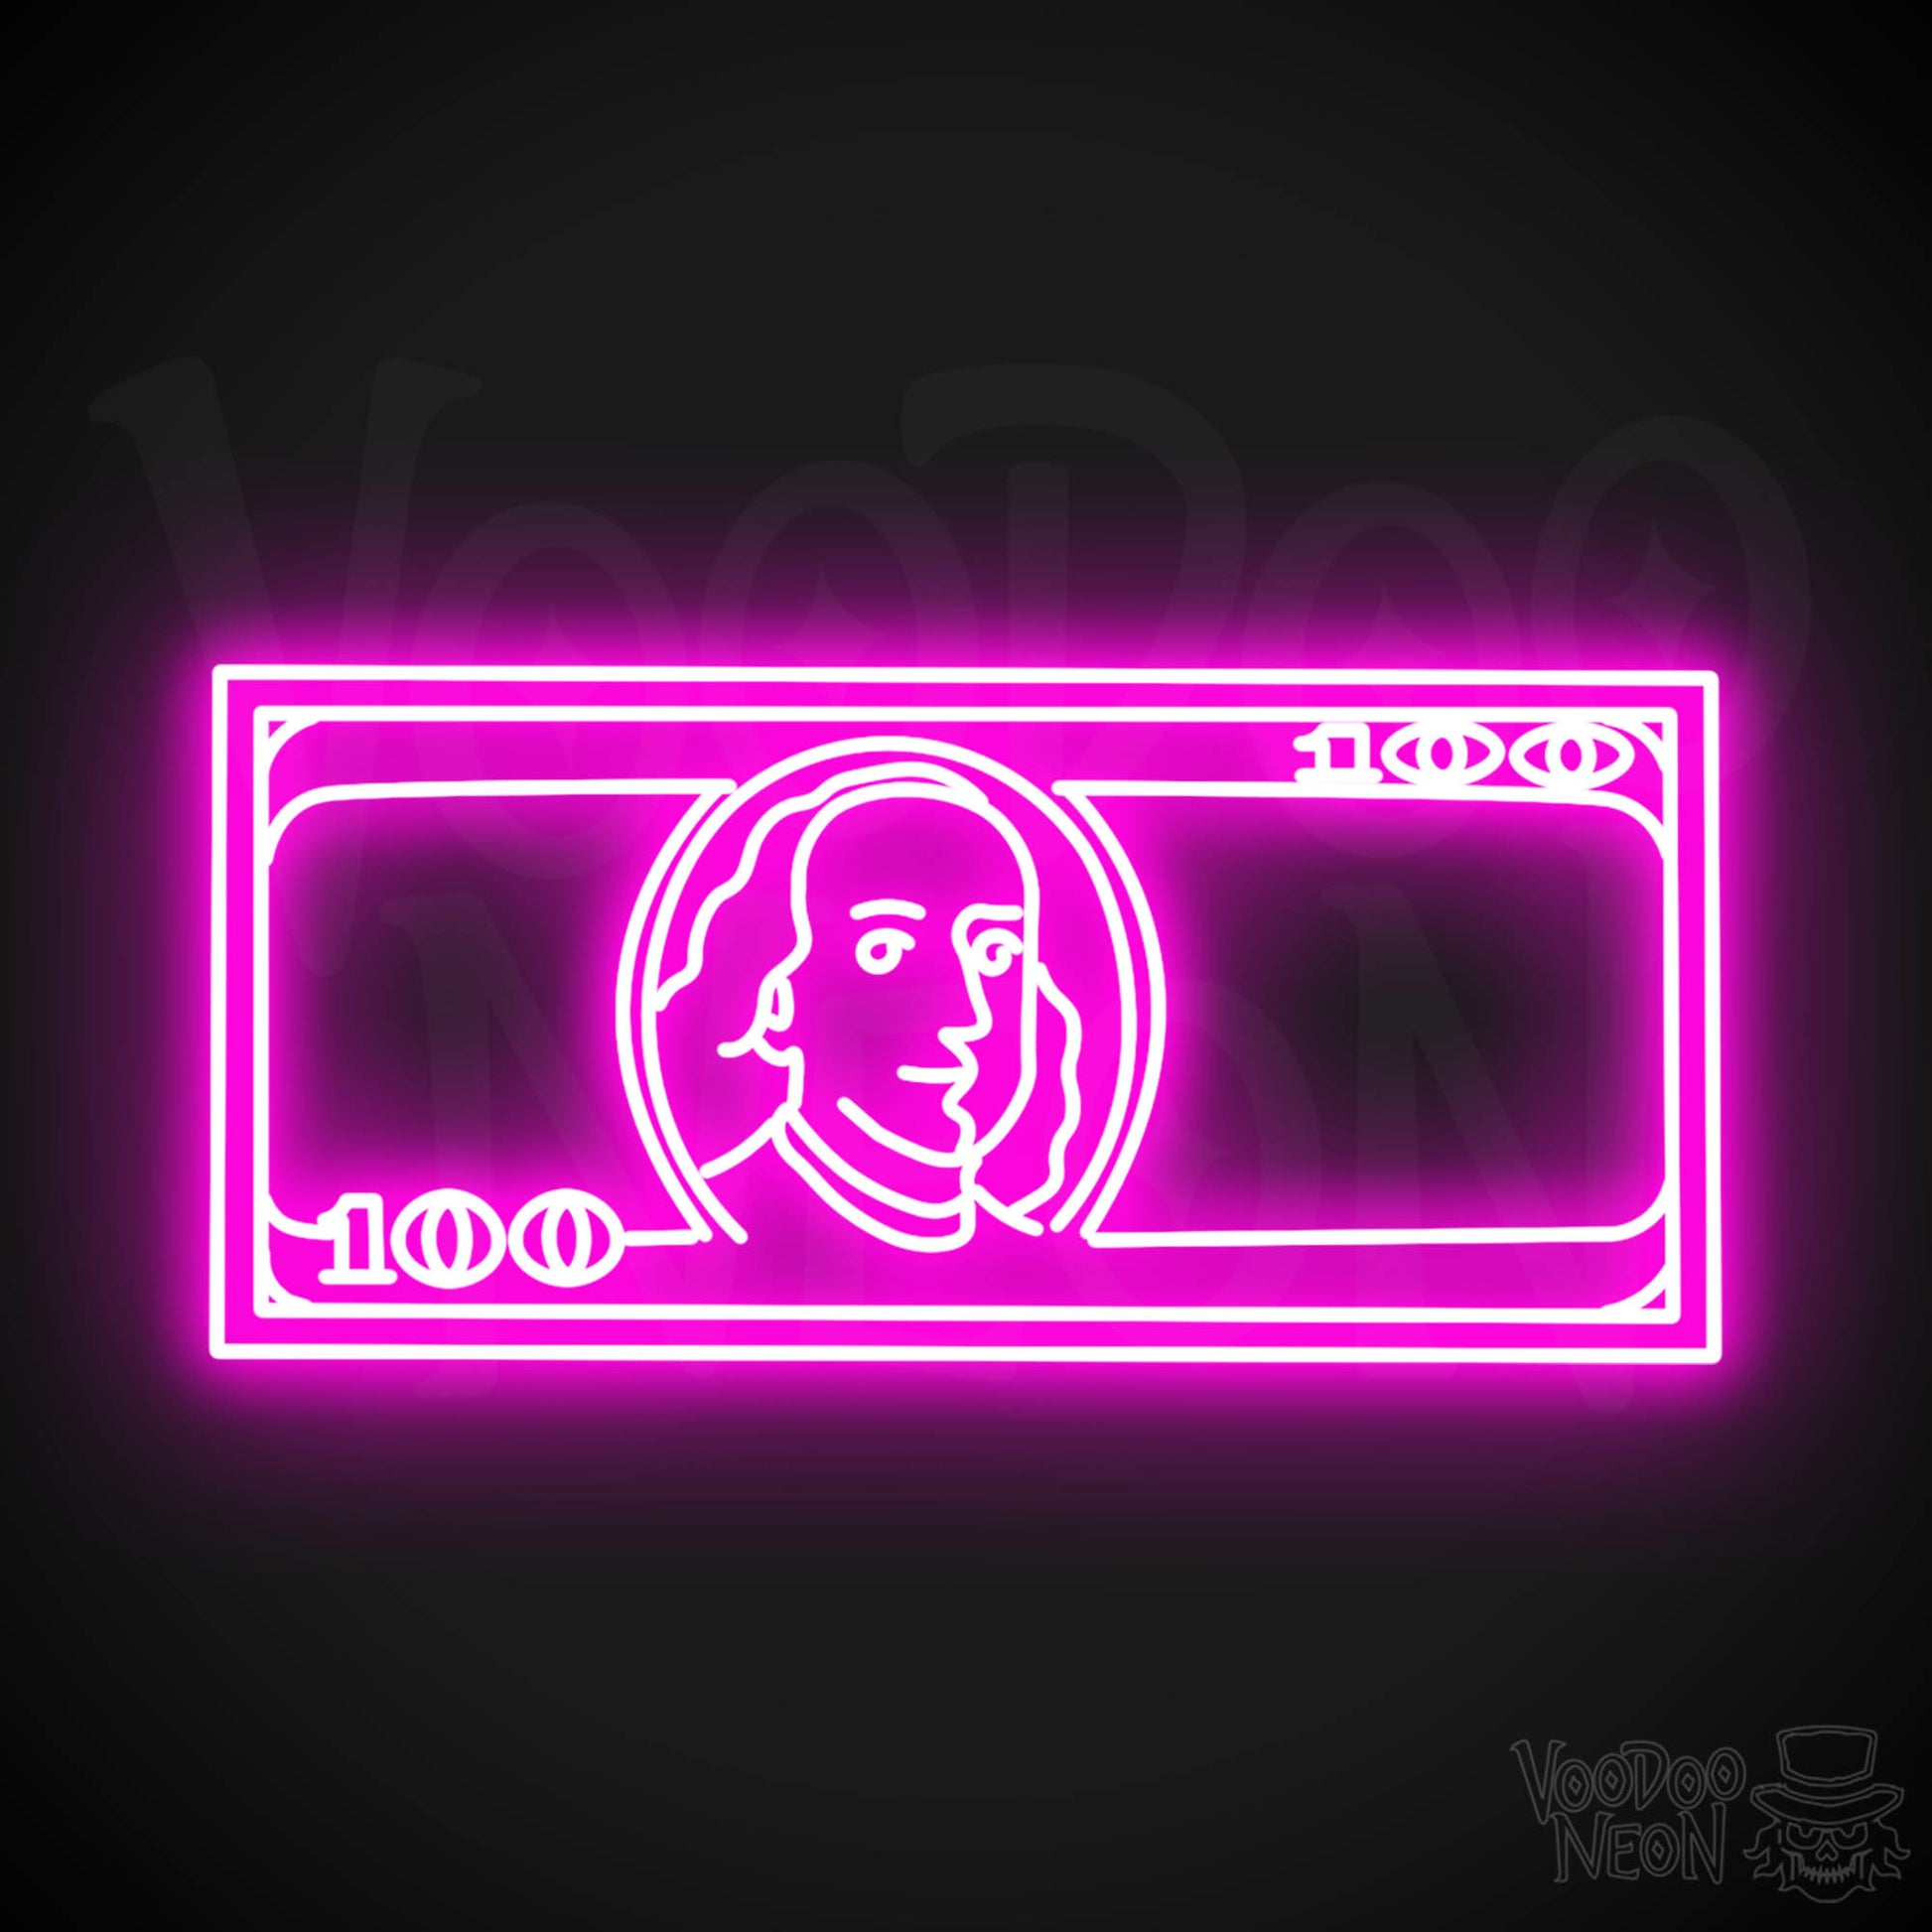 US $100 Bill Neon Sign - Neon $100 Sign - Color Pink